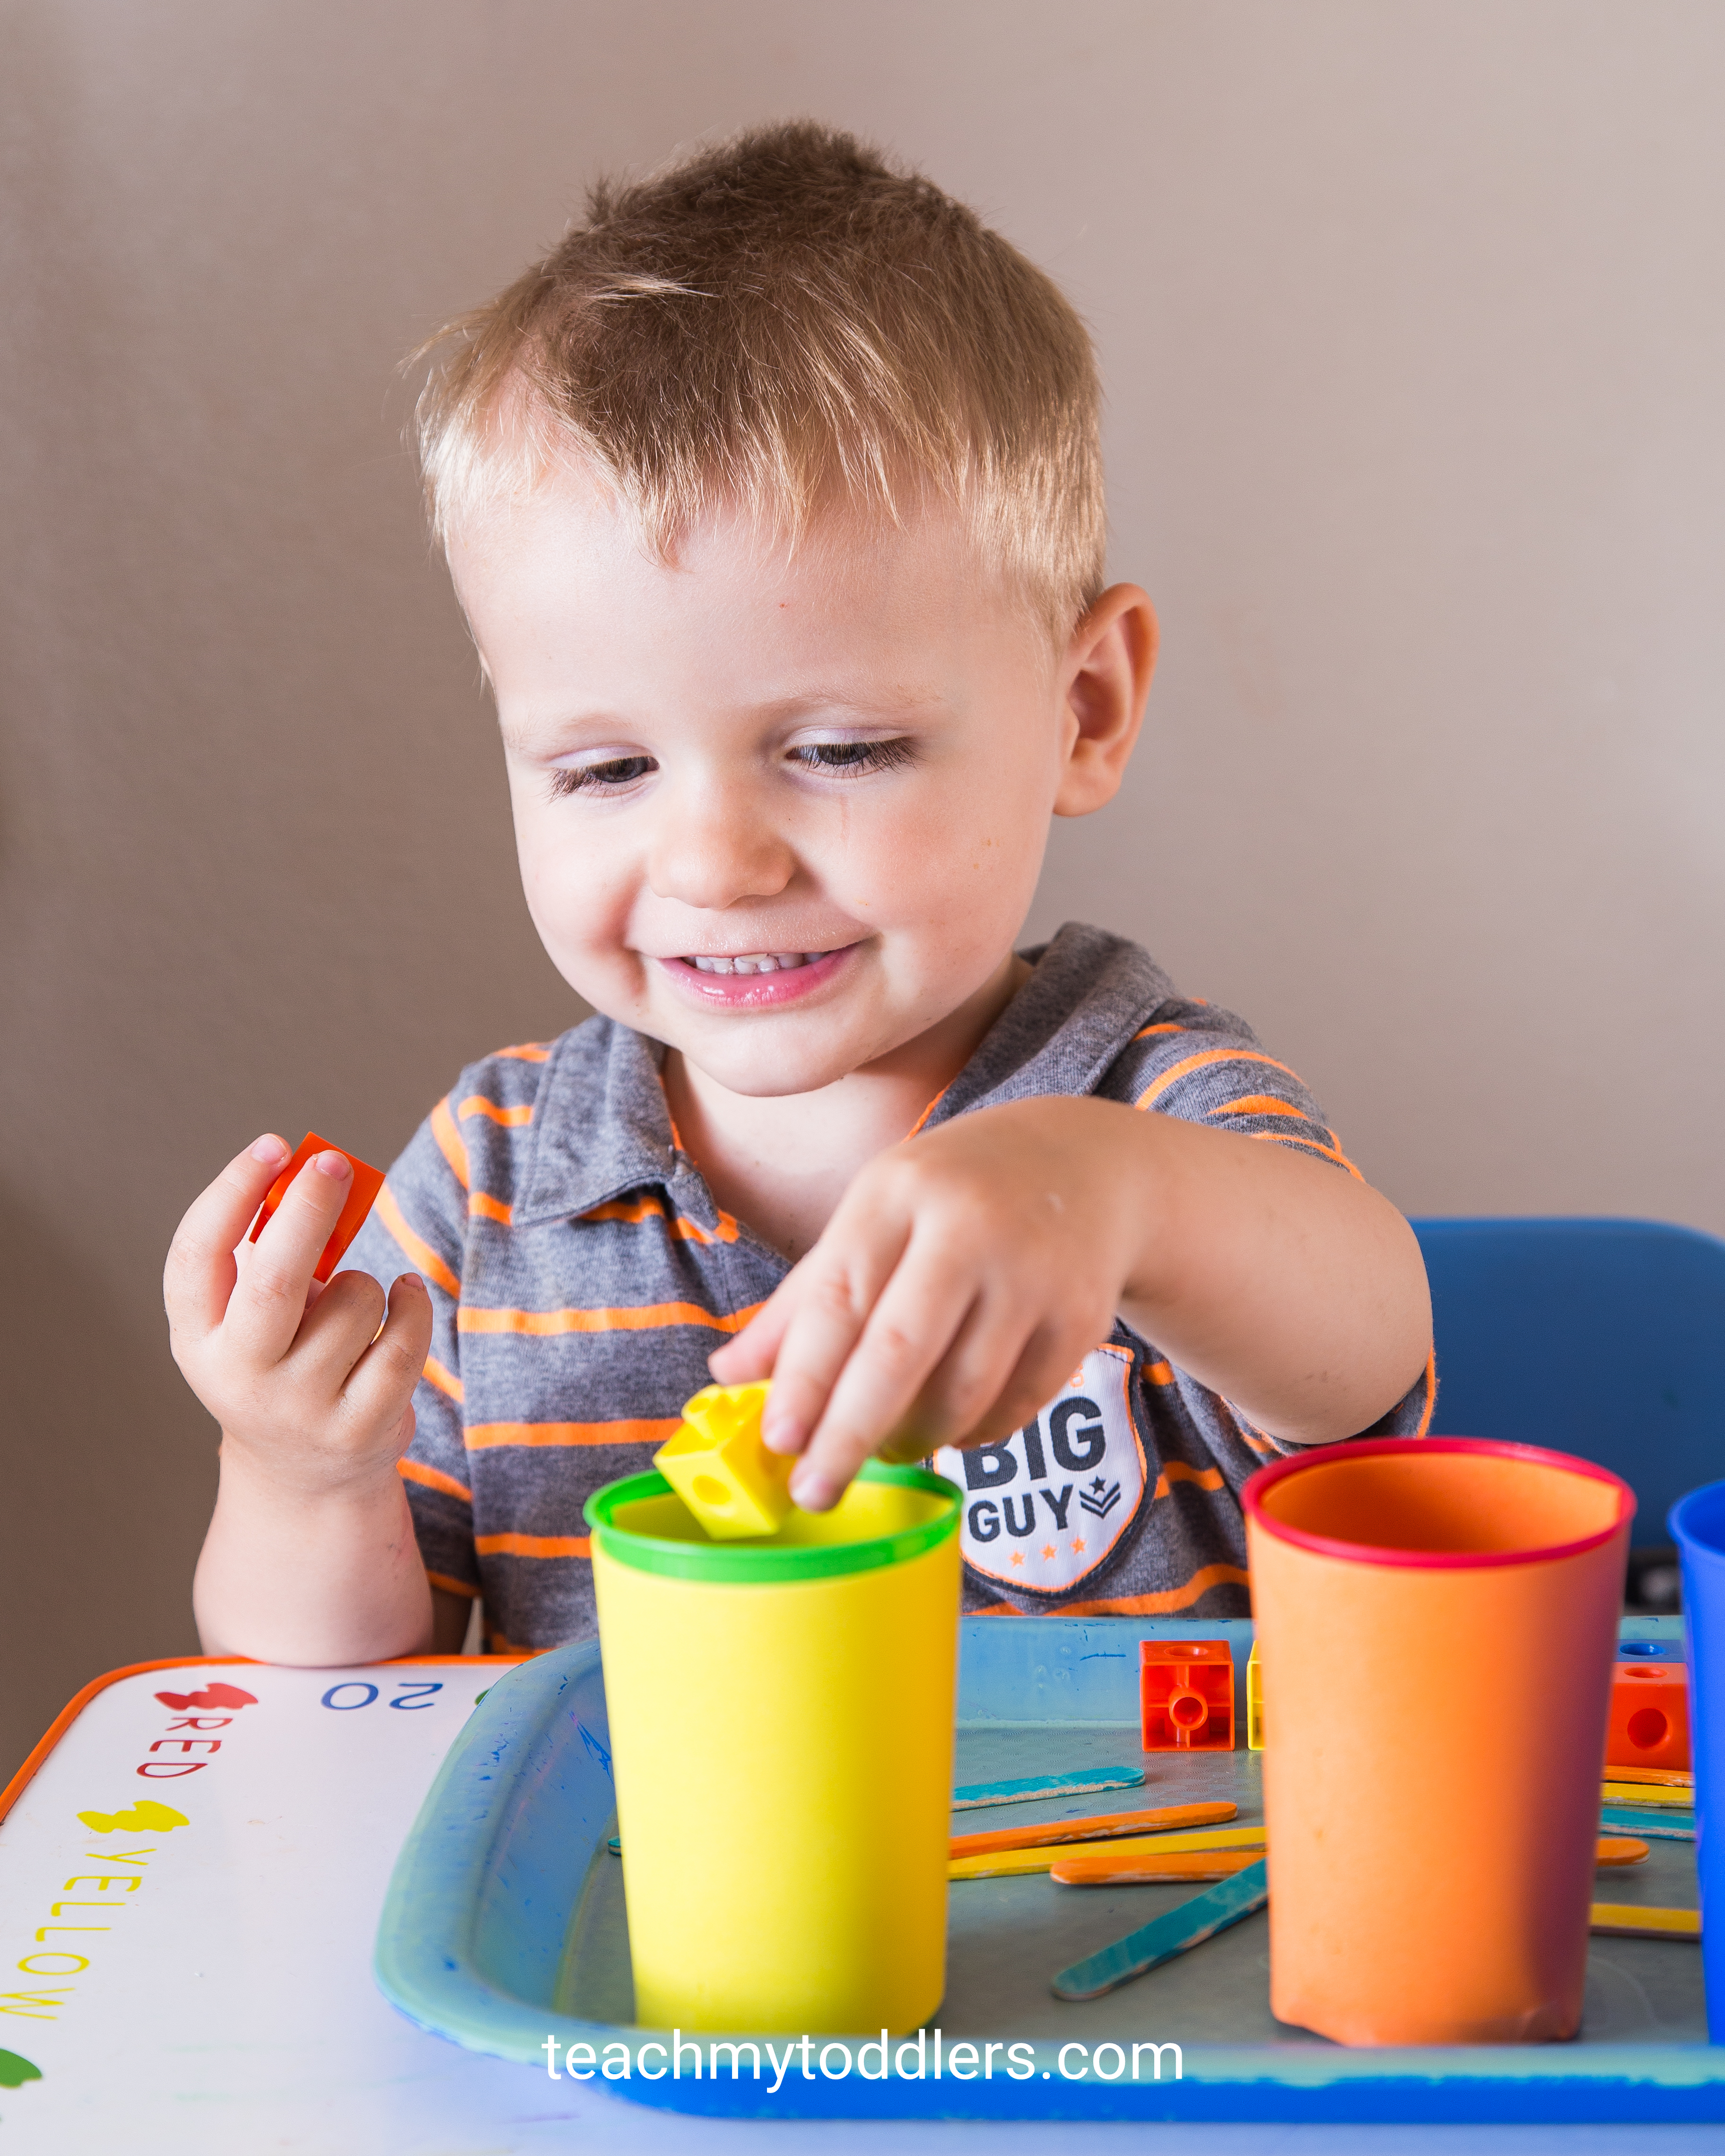 These tot trays are a good way to teach toddlers the color orange